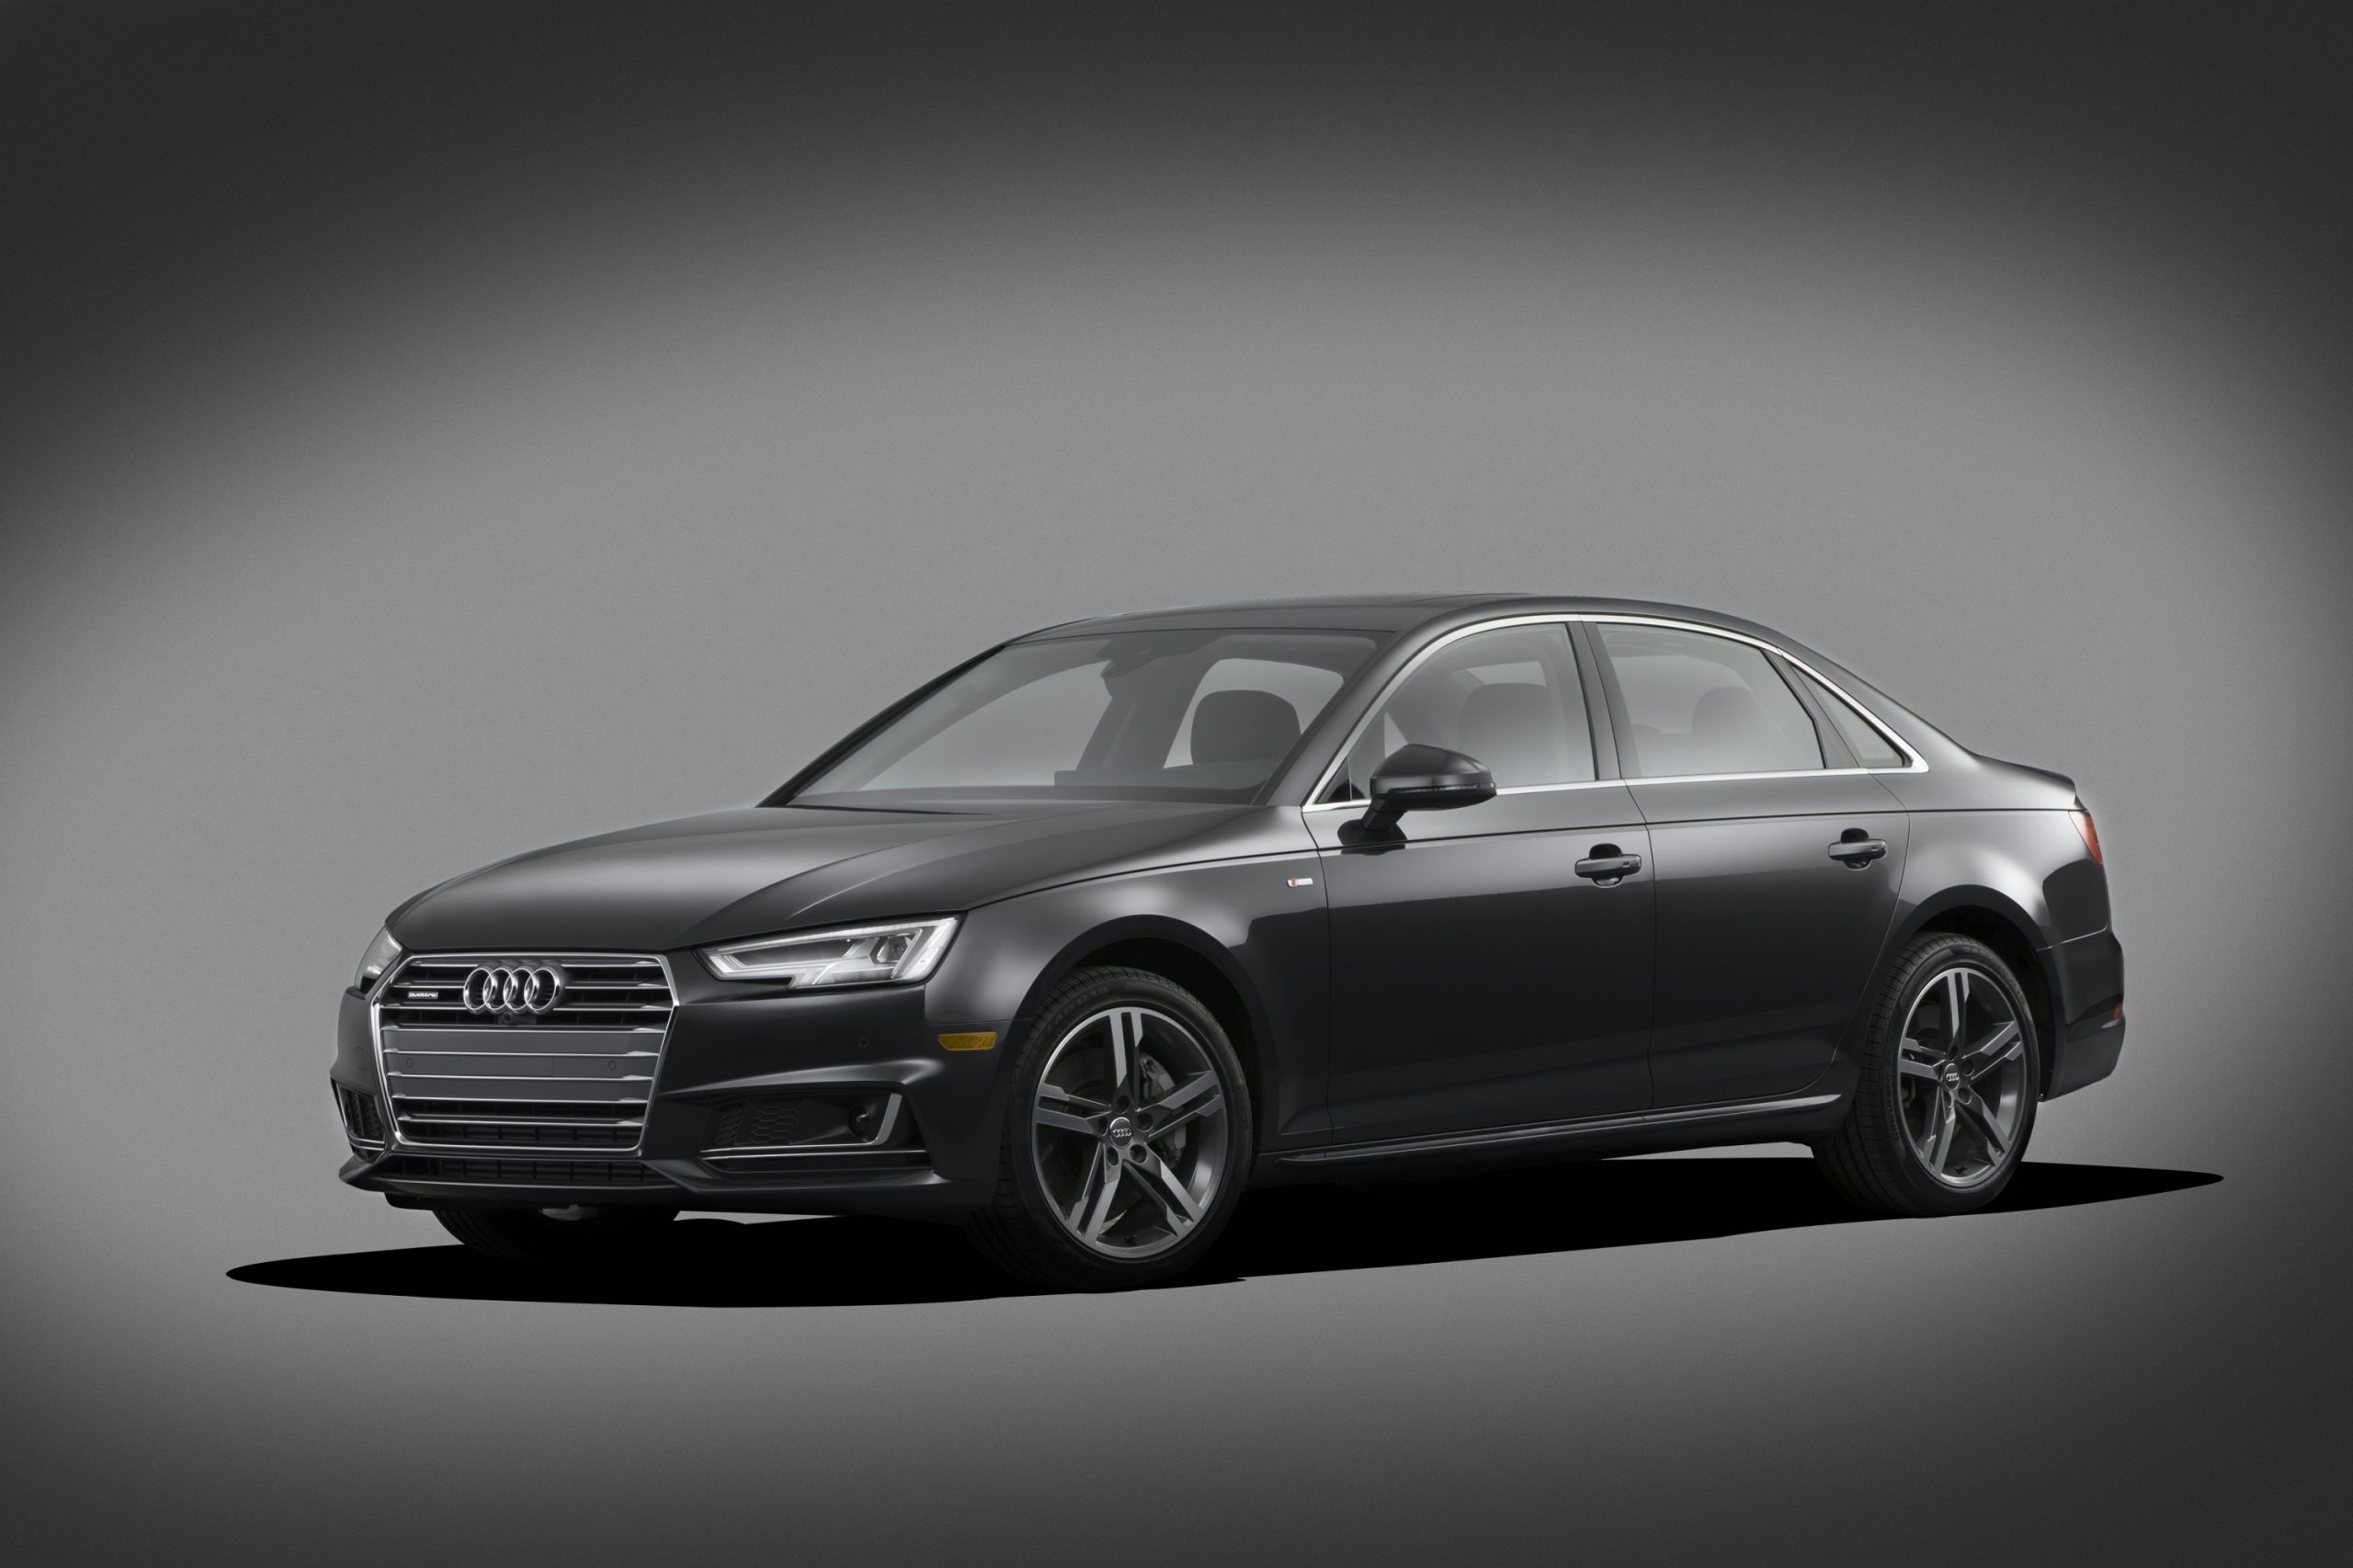 The Audi A4 in grey, a solid certified pre-owned buy, shot from the 3/4 angle in a photo studio